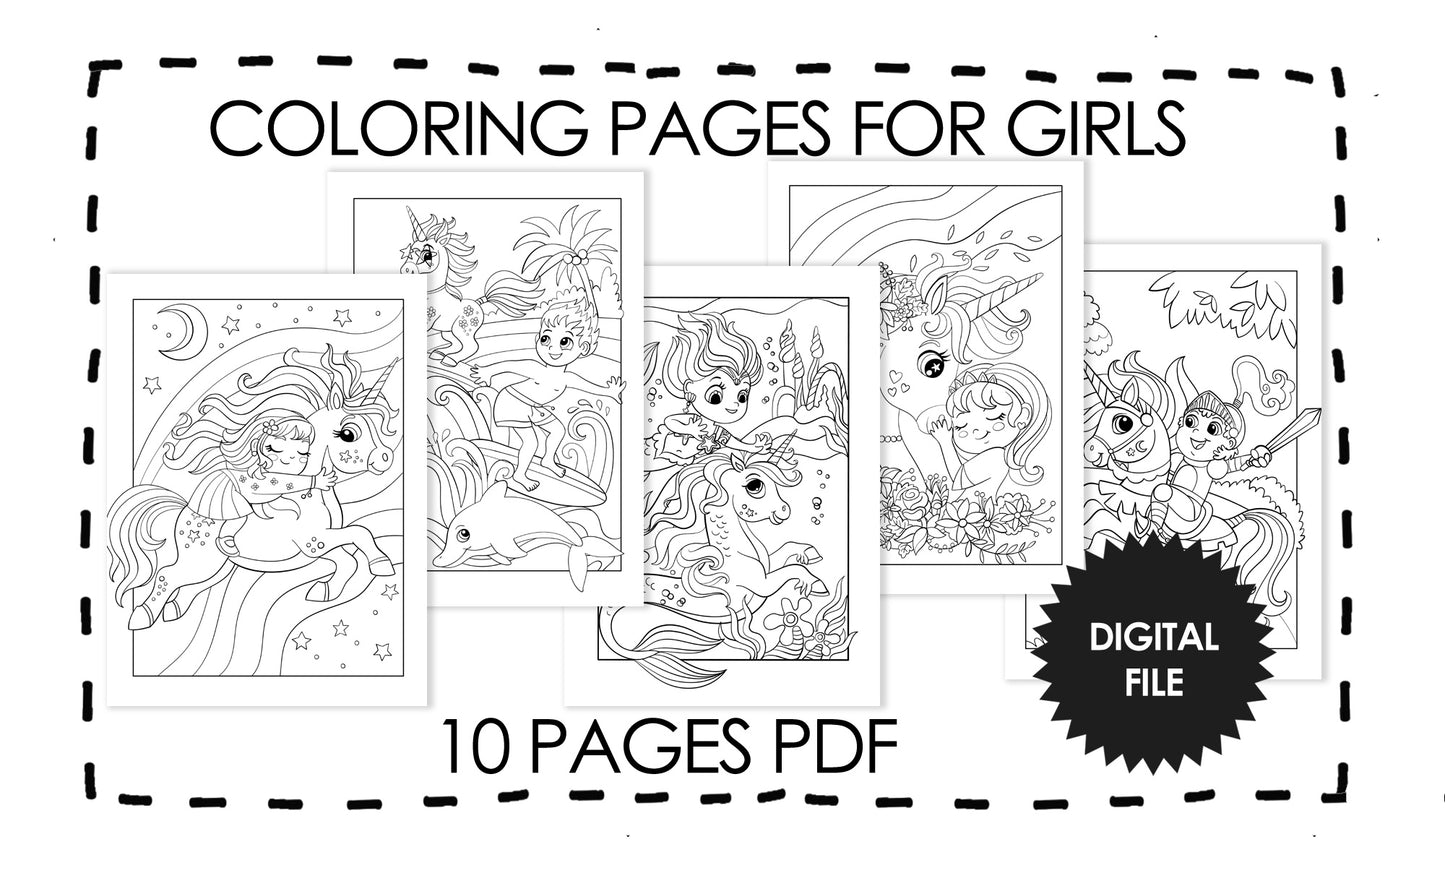 Unicorn Coloring Pages For Girls, Cute Unicorns Coloring Book,Instant Download 10 page PDF,Print At Home, Get Your Coloring Pages in Seconds